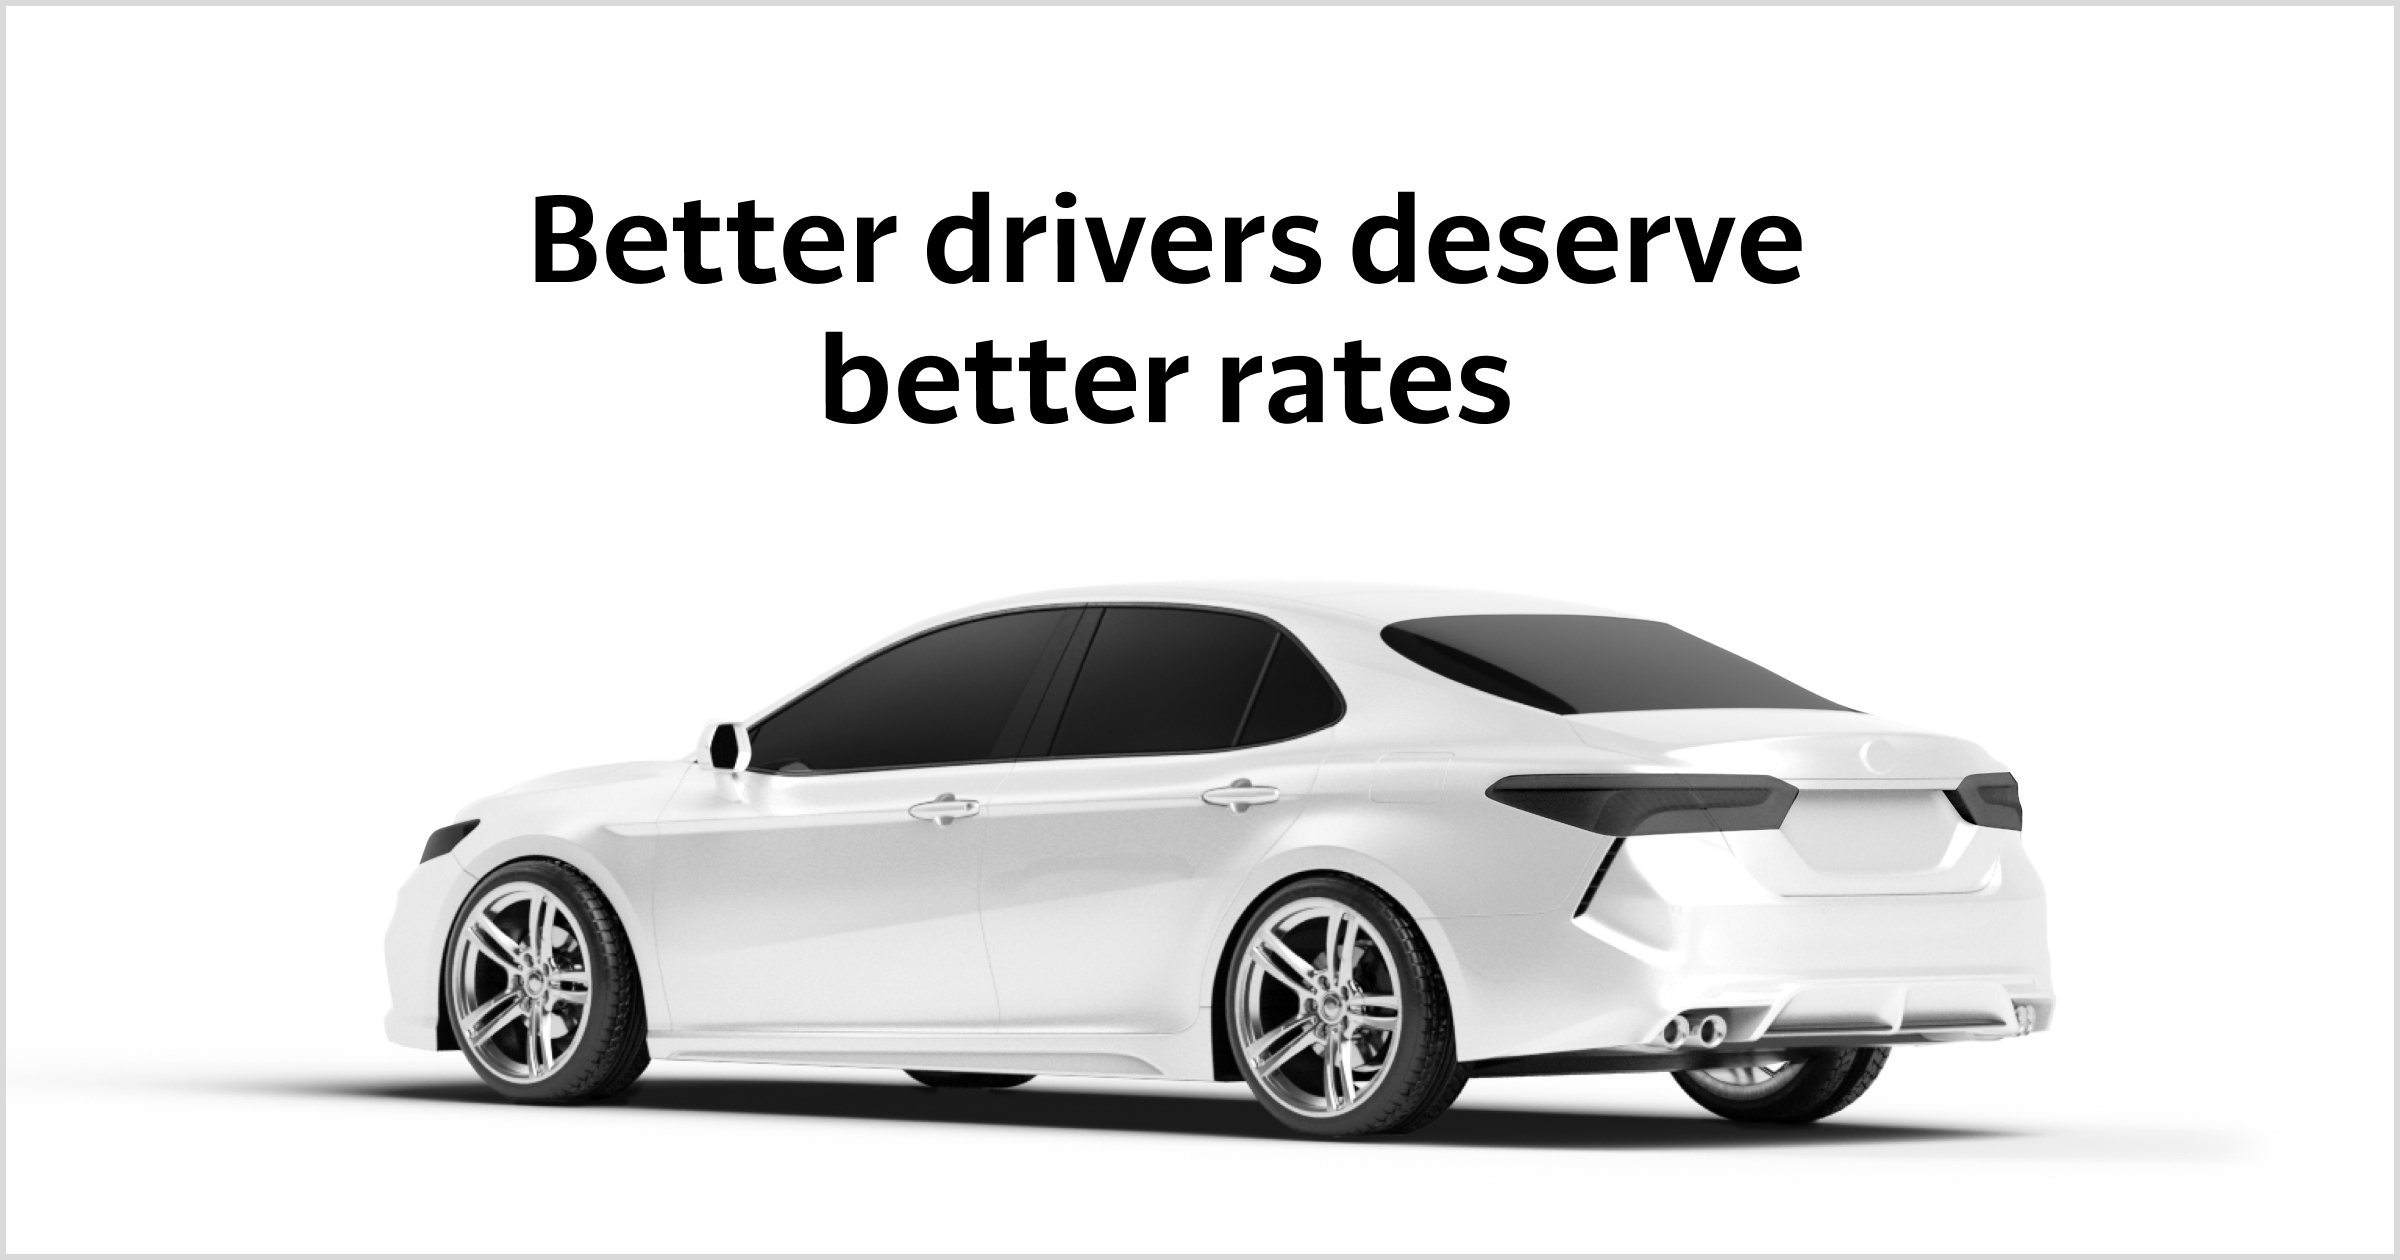 Cheaper Car Insurance? Online Quotes from just £299